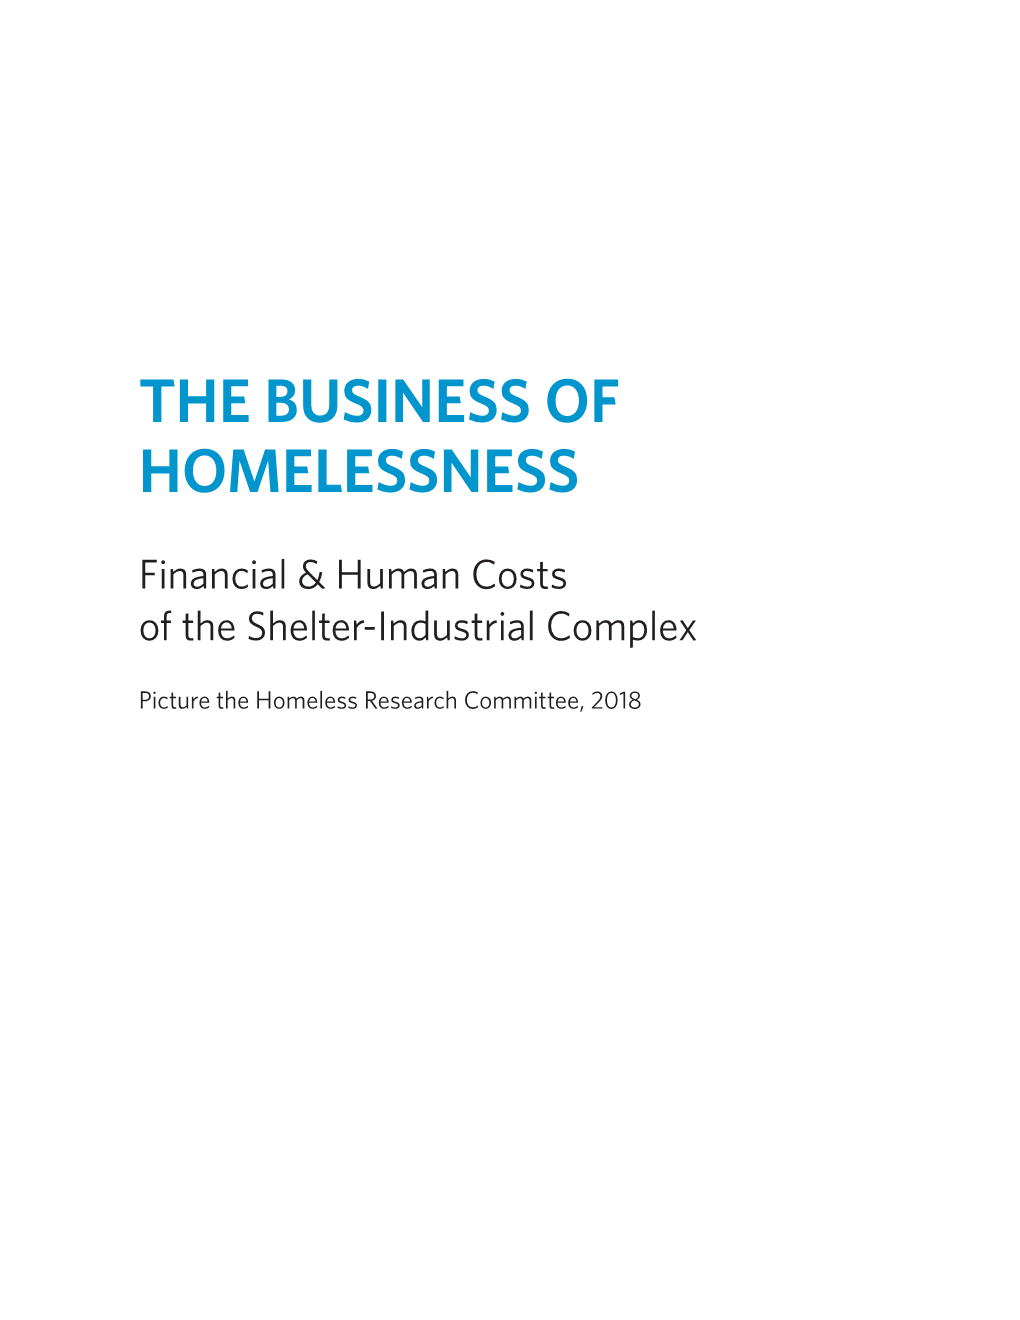 The Business of Homelessness